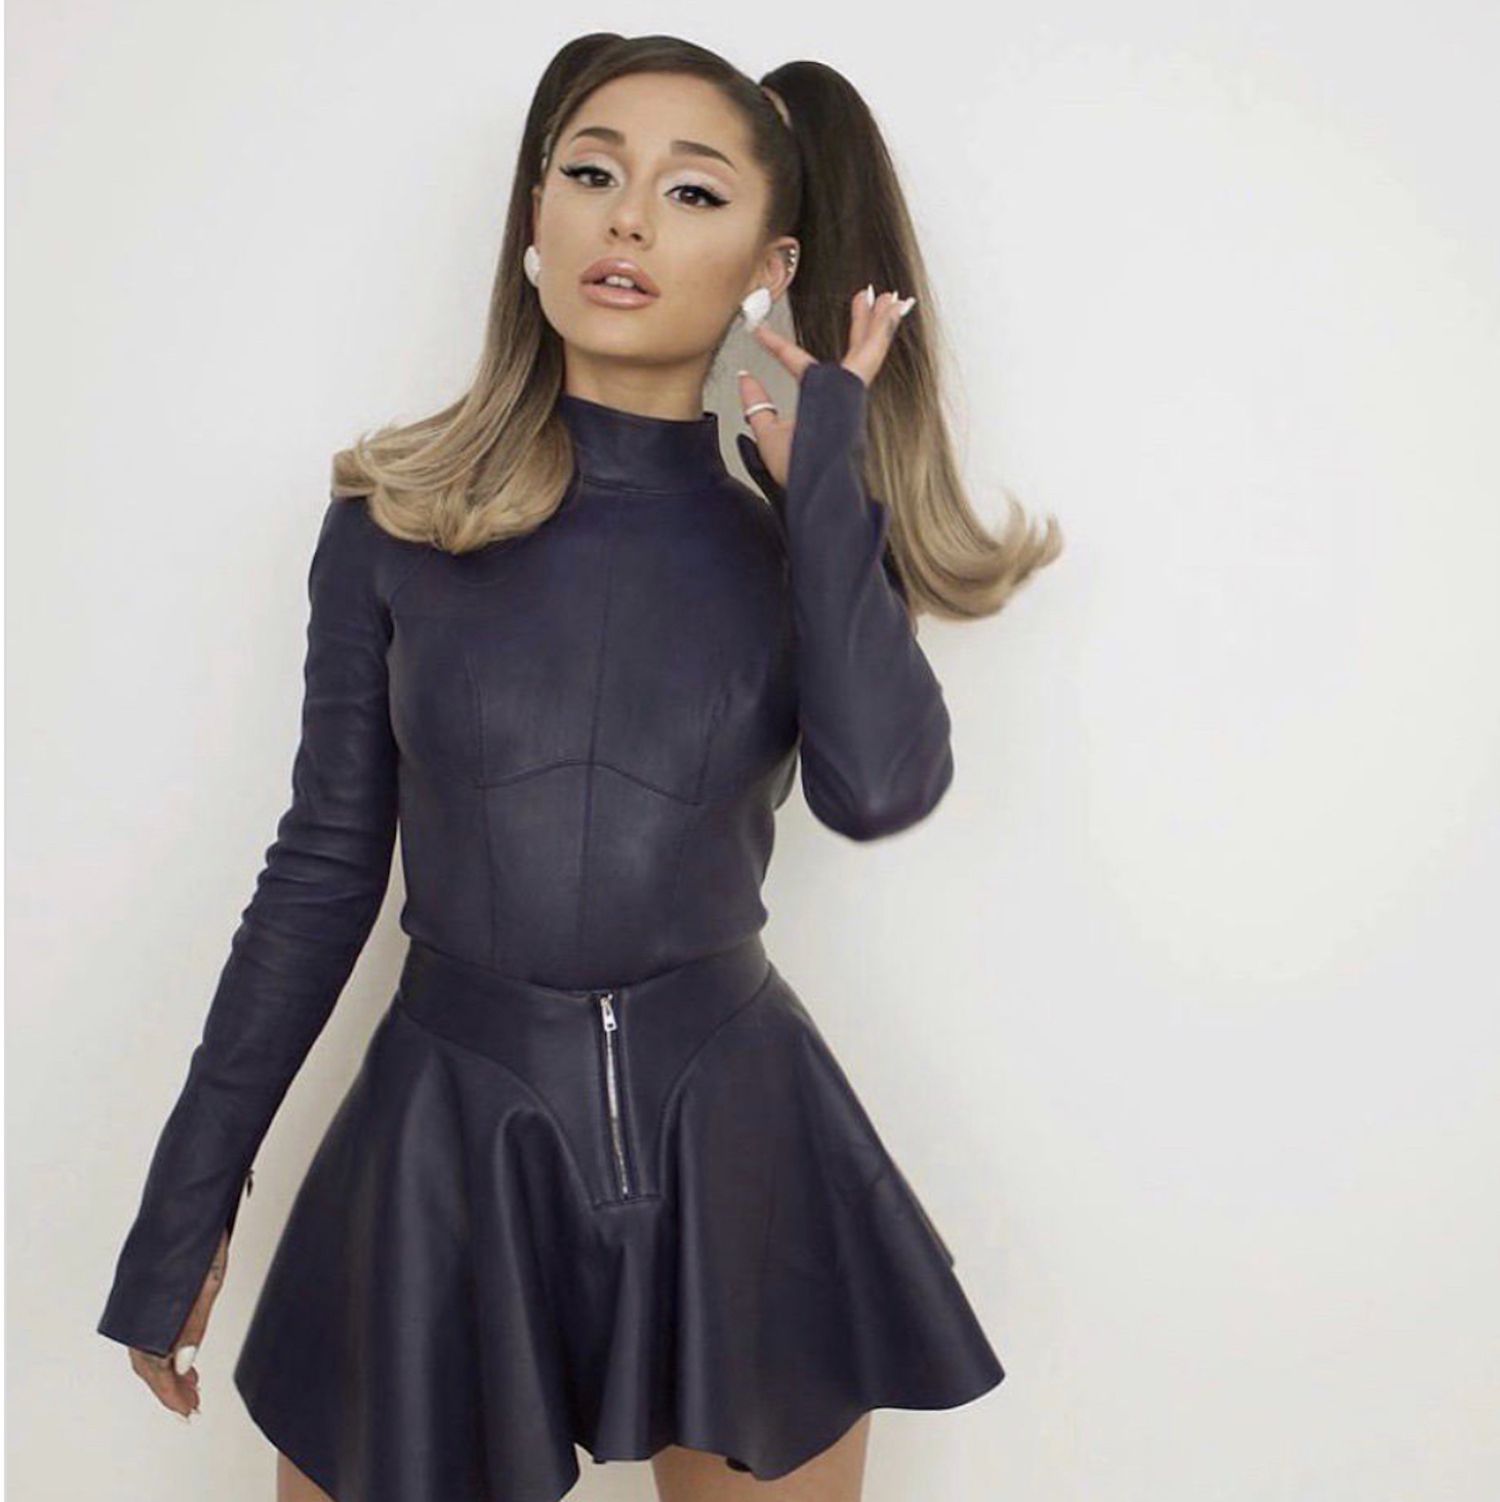 Ariana Grande wears a high-neck bodysuit, leather skater skirt, and high pigtails with flipped ends